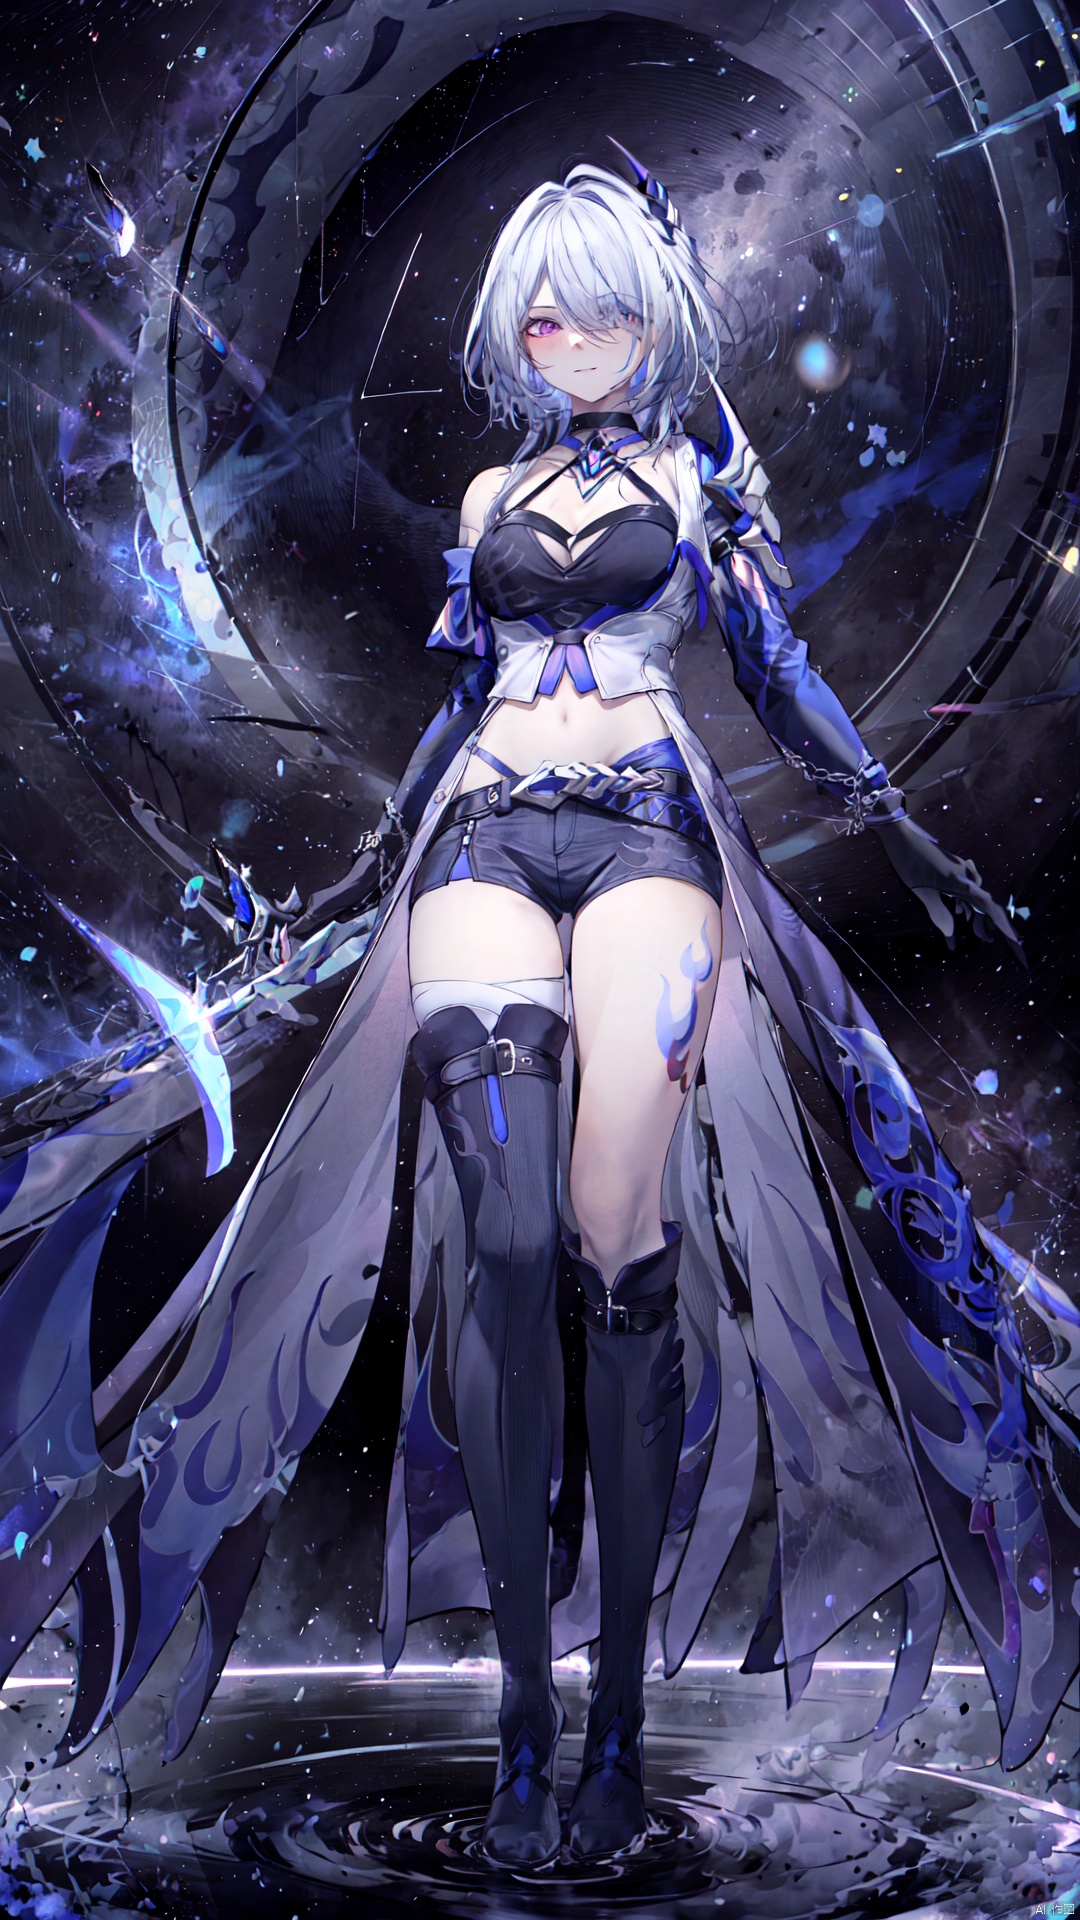  1girl,braid,solo,long_hair,barefoot,blush,collarbone,planetarium,Spacesuit,astronaut girl,Astronaut,astronaut helmet,universe background,universemarvel,宇宙空间,Observatory,astronomicalclock,astrophotography,黄道经纬仪,天文望远镜,地动仪,黑色瓷砖地板,reflective eyes,shiny clothes,reflective floor,glowing eyes,Glowing ambiance,,Cool tones,COLDlight,地平经纬仪,摄影机,device,仪器,Amechanical,观测站,radio telescope,StarTrails,xingchen,天象仪,纪限仪,booklet,Promotional posters,The suspended Earth,suspended in the air,theplanet,星球模型,Chinese Character,Foucault pendulum,A beautiful female,Full bodydiagram,极致光影,极致画质,极致细节,机制色彩,,ultra-detailed,Super detailed details,Super detailed background,Highest Quality,Highest Resolution,Highest picture quality,8K Resolution,8K HD,8K picture quality,8K rendering:1.0,8K wallpaper,coatdown,橙色羽绒服,beautiful woman with white hair,Gray Hair,red pupil,slit pupils,White Sneakers,Leg ring,sunglasses,Sci-Fi,Sci-fistyle,透明袖套,Dindahleffect,丁达尔光,xingchen,star hair ornament,,starry sky,Astral,gloves,necklace,pendant,short hair,evil smile,1girl,full body,spread arms,camera,body stocking,striped socks,fingerless gloves,Lace Bra,Lacelingerie,镭射背心